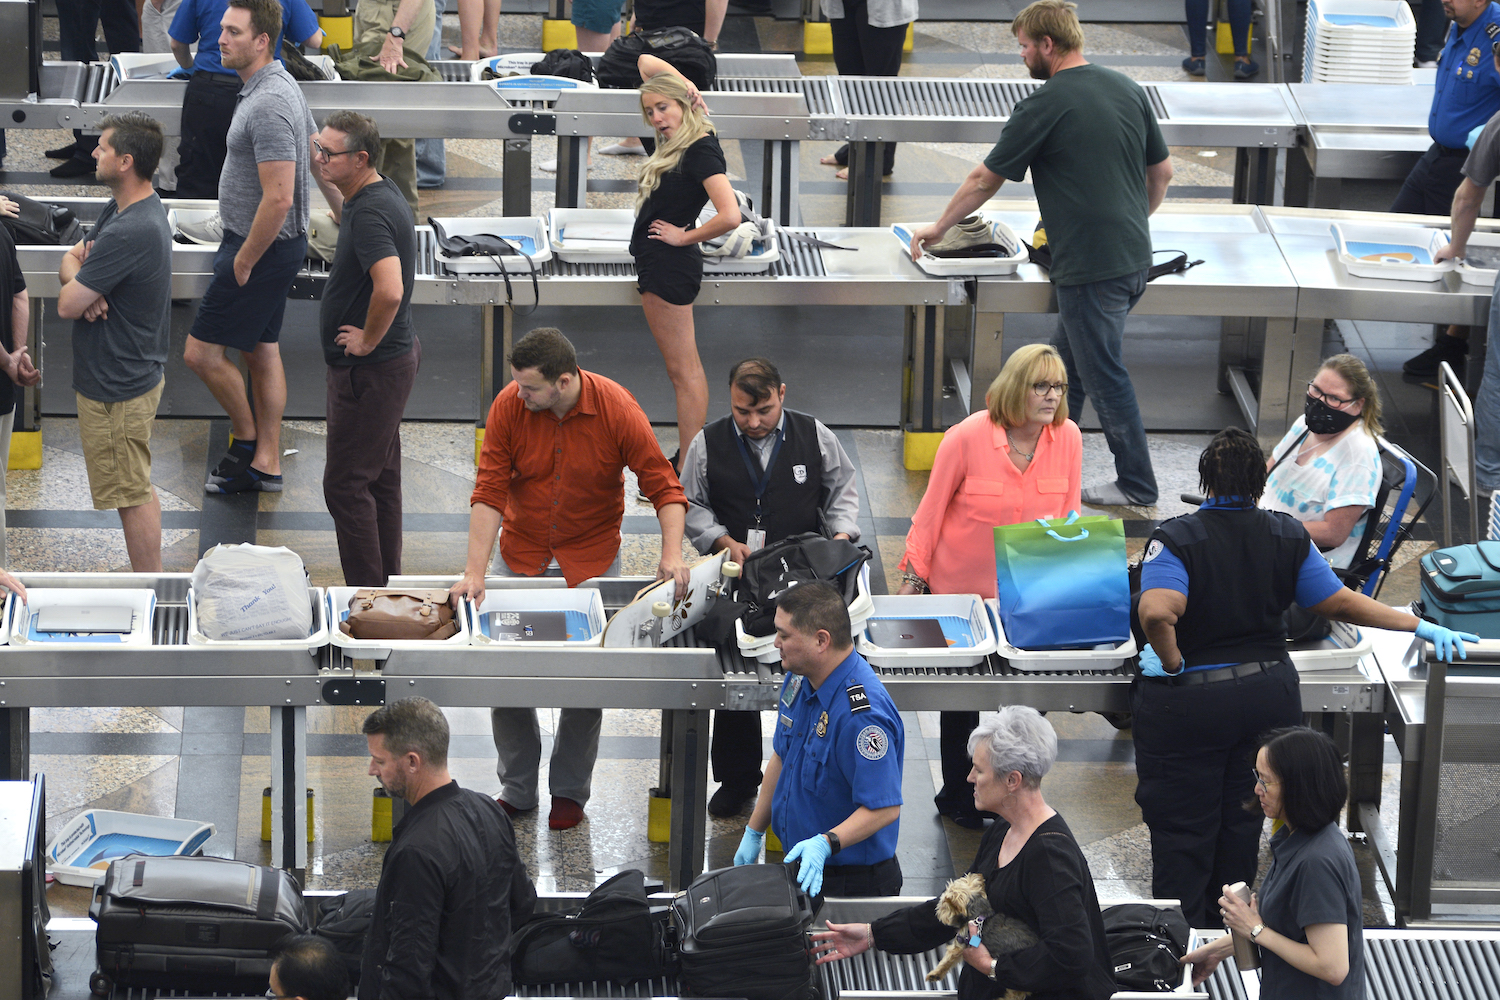 Airplane passengers proceed through the TSA security checkpoint at Denver International Airport